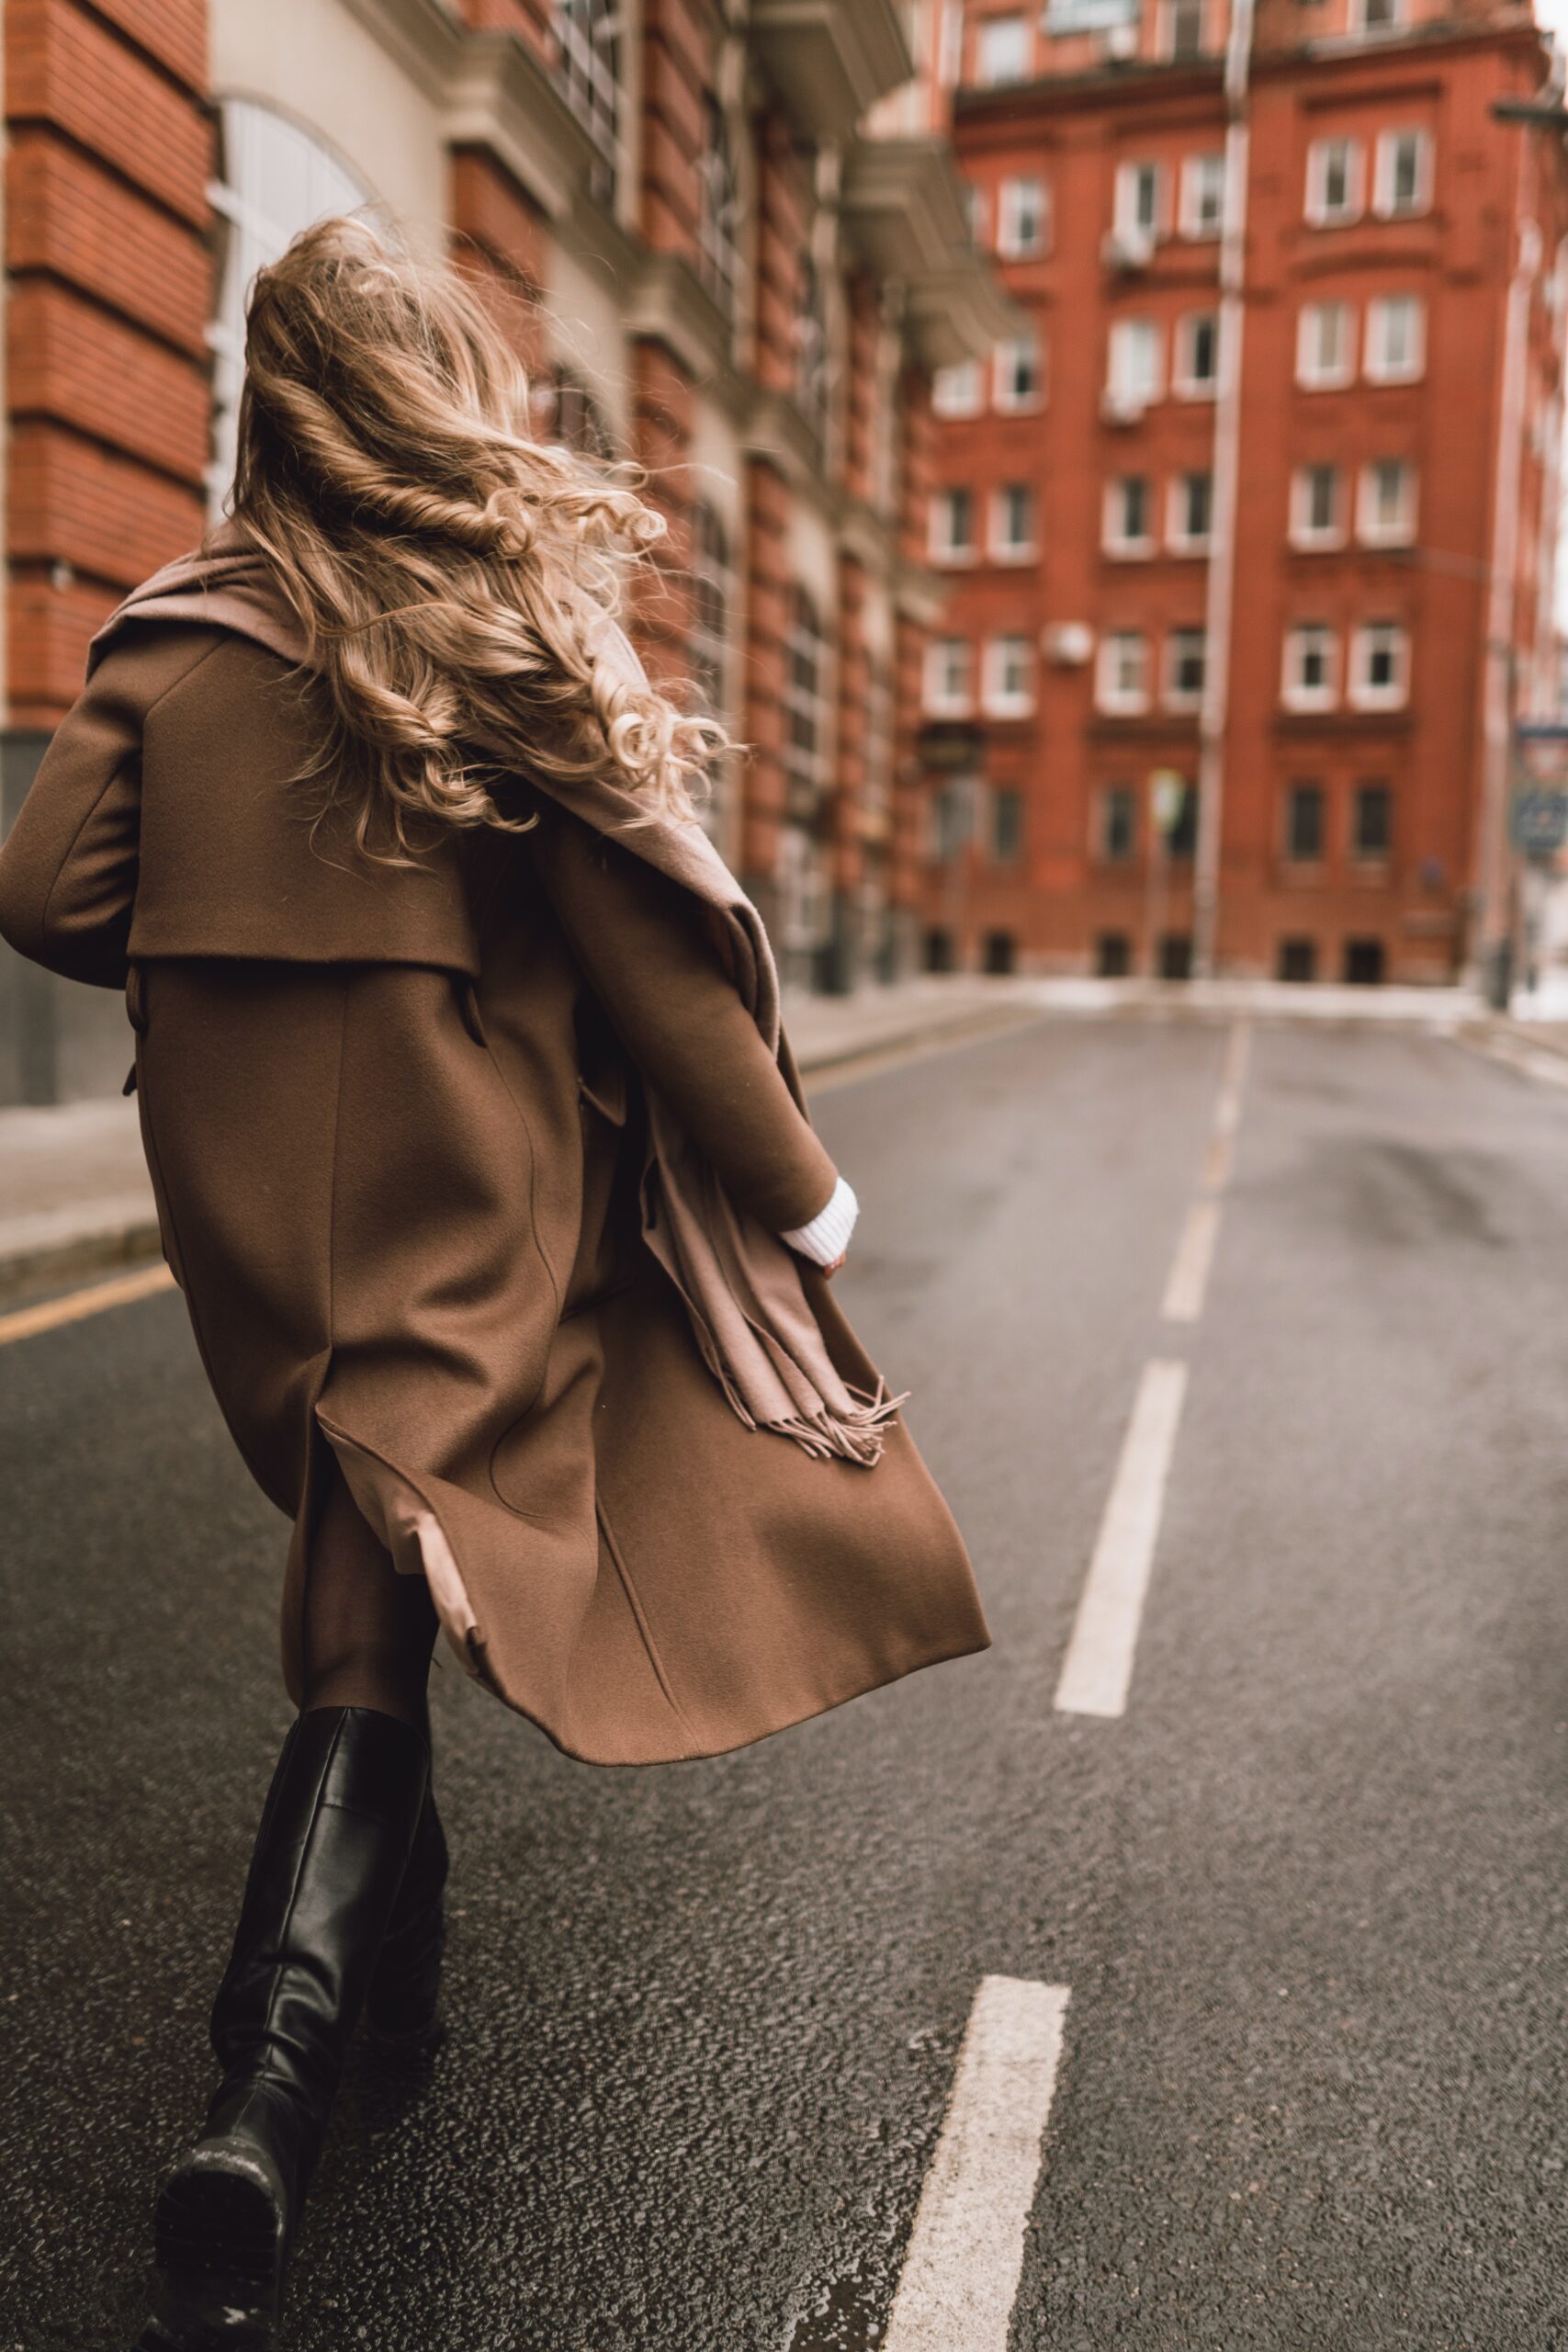 Image of the back of a woman walking down an empty street. She's wearing black knee-high boots and a brown overcoat with a cream and brown scarf and has long, dirty blonde curly hair.